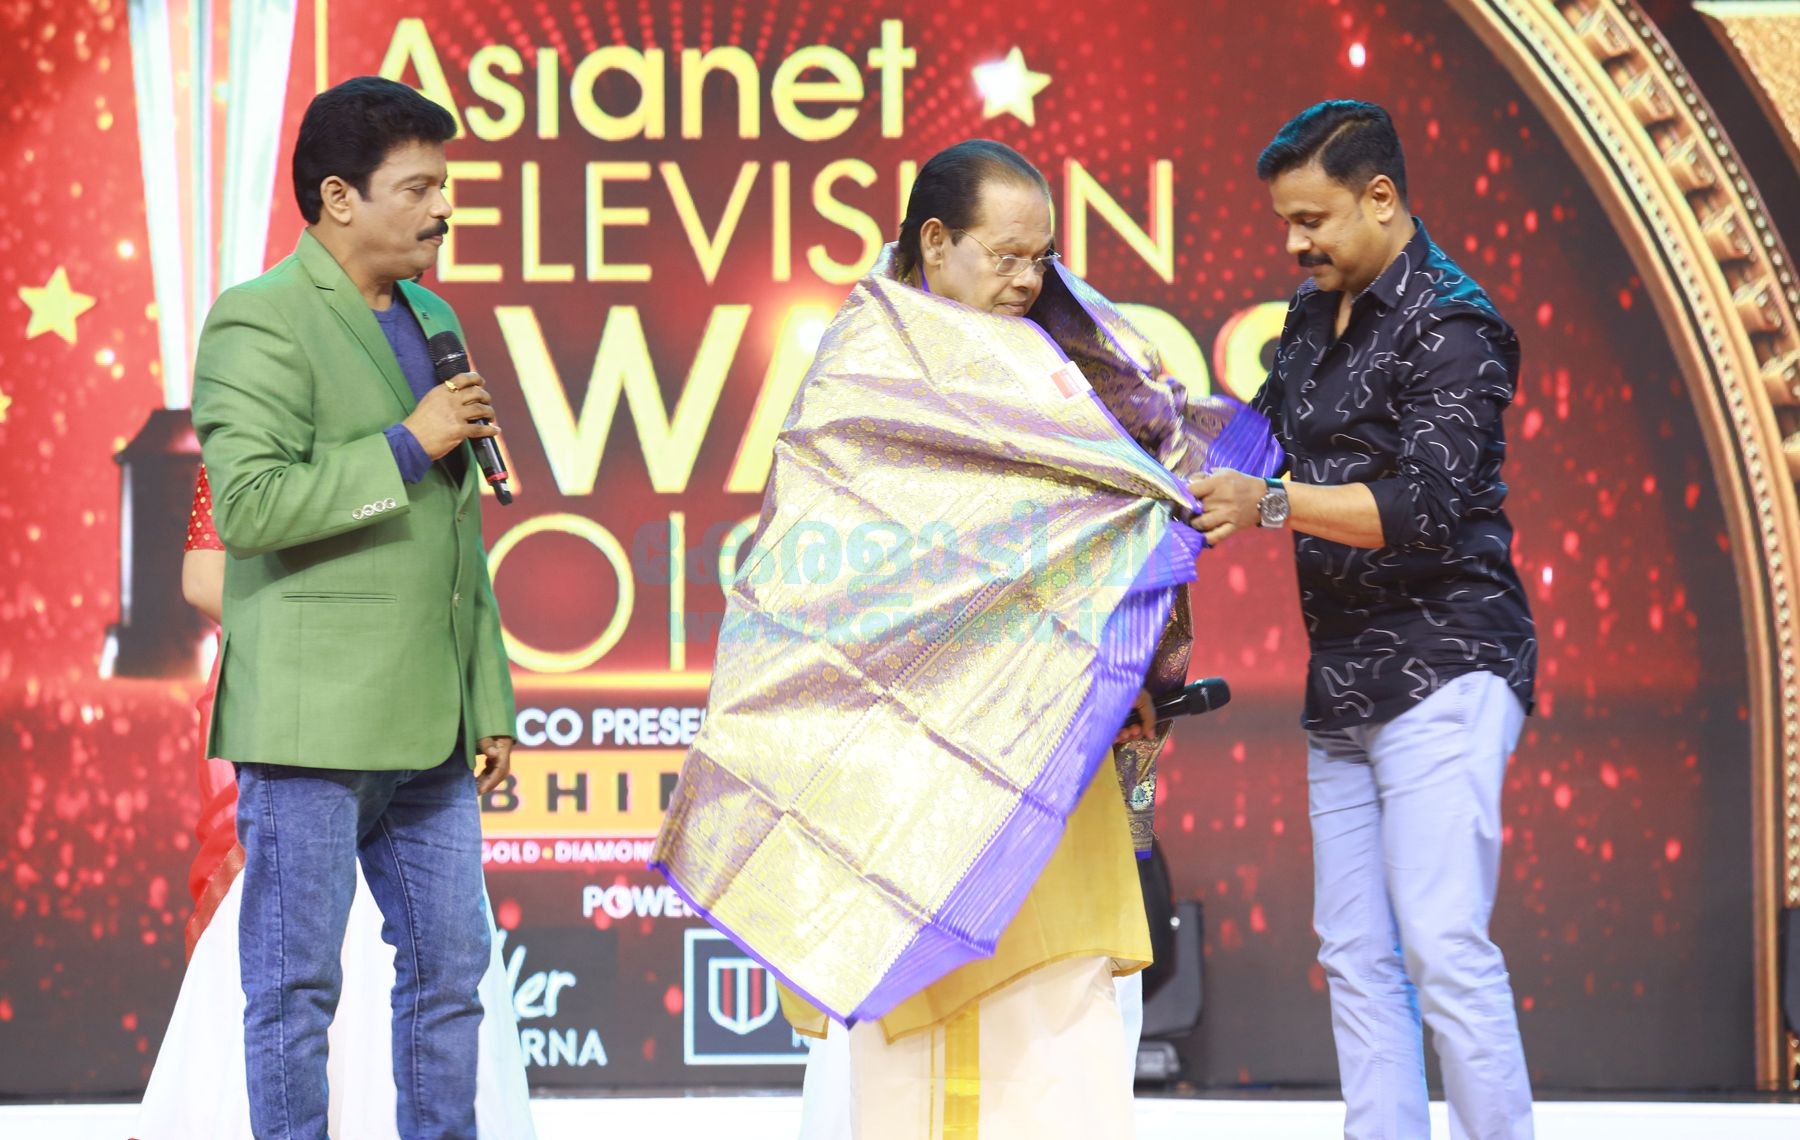 Innocent and dileep at Asianet Television Awards 2019